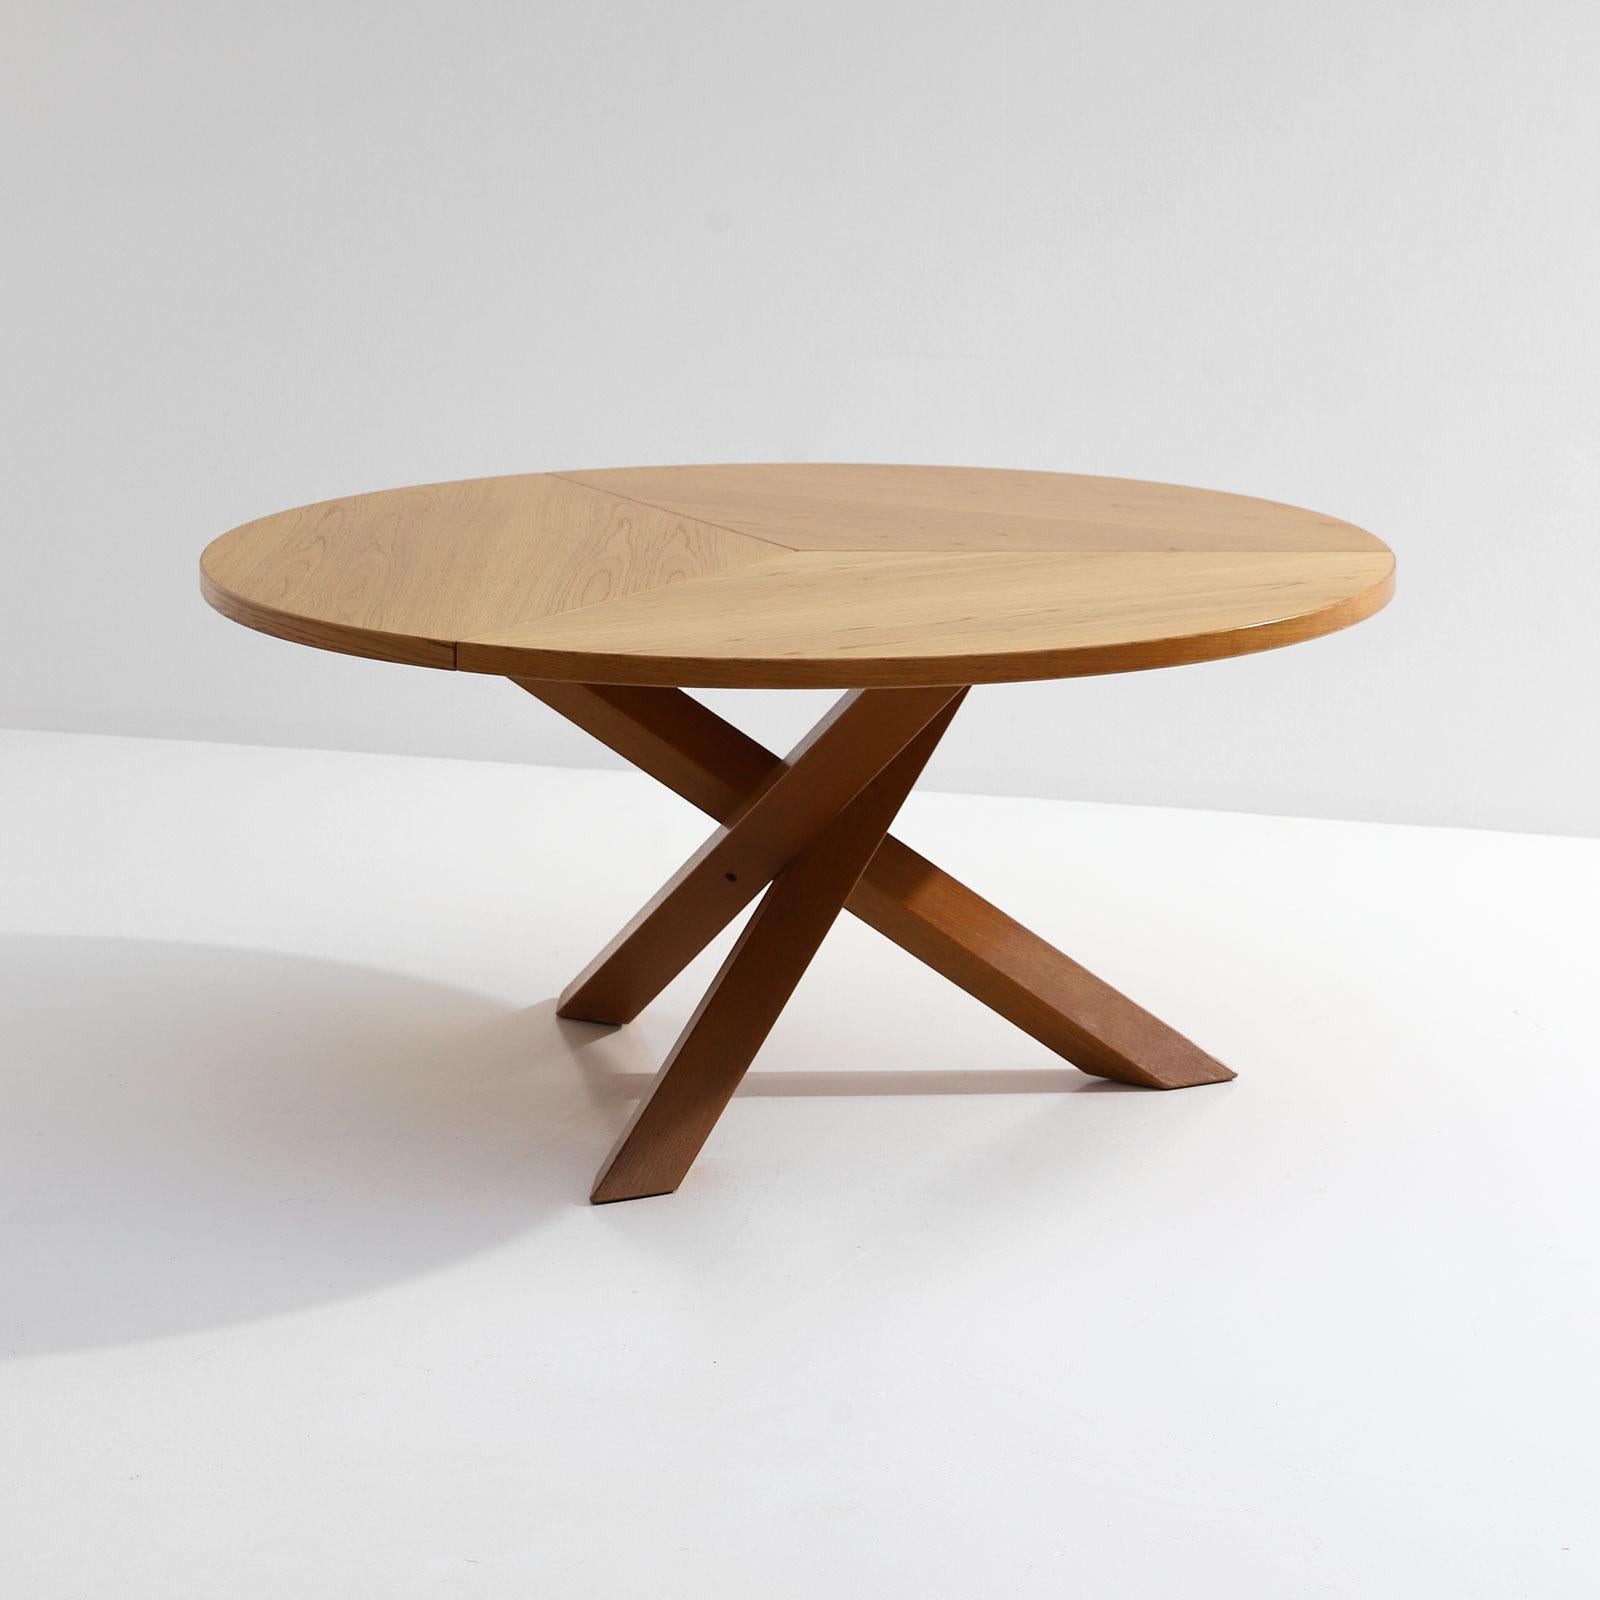 Gerard Geytenbeek, AZS, Netherlands, 1960s
Martin Visser, dining table, spectrum
Large round dining table designed by Gerard Geytenbeek for AZS the Netherlands in the 1960s. The round top is divided into three parts and is build in solid pine